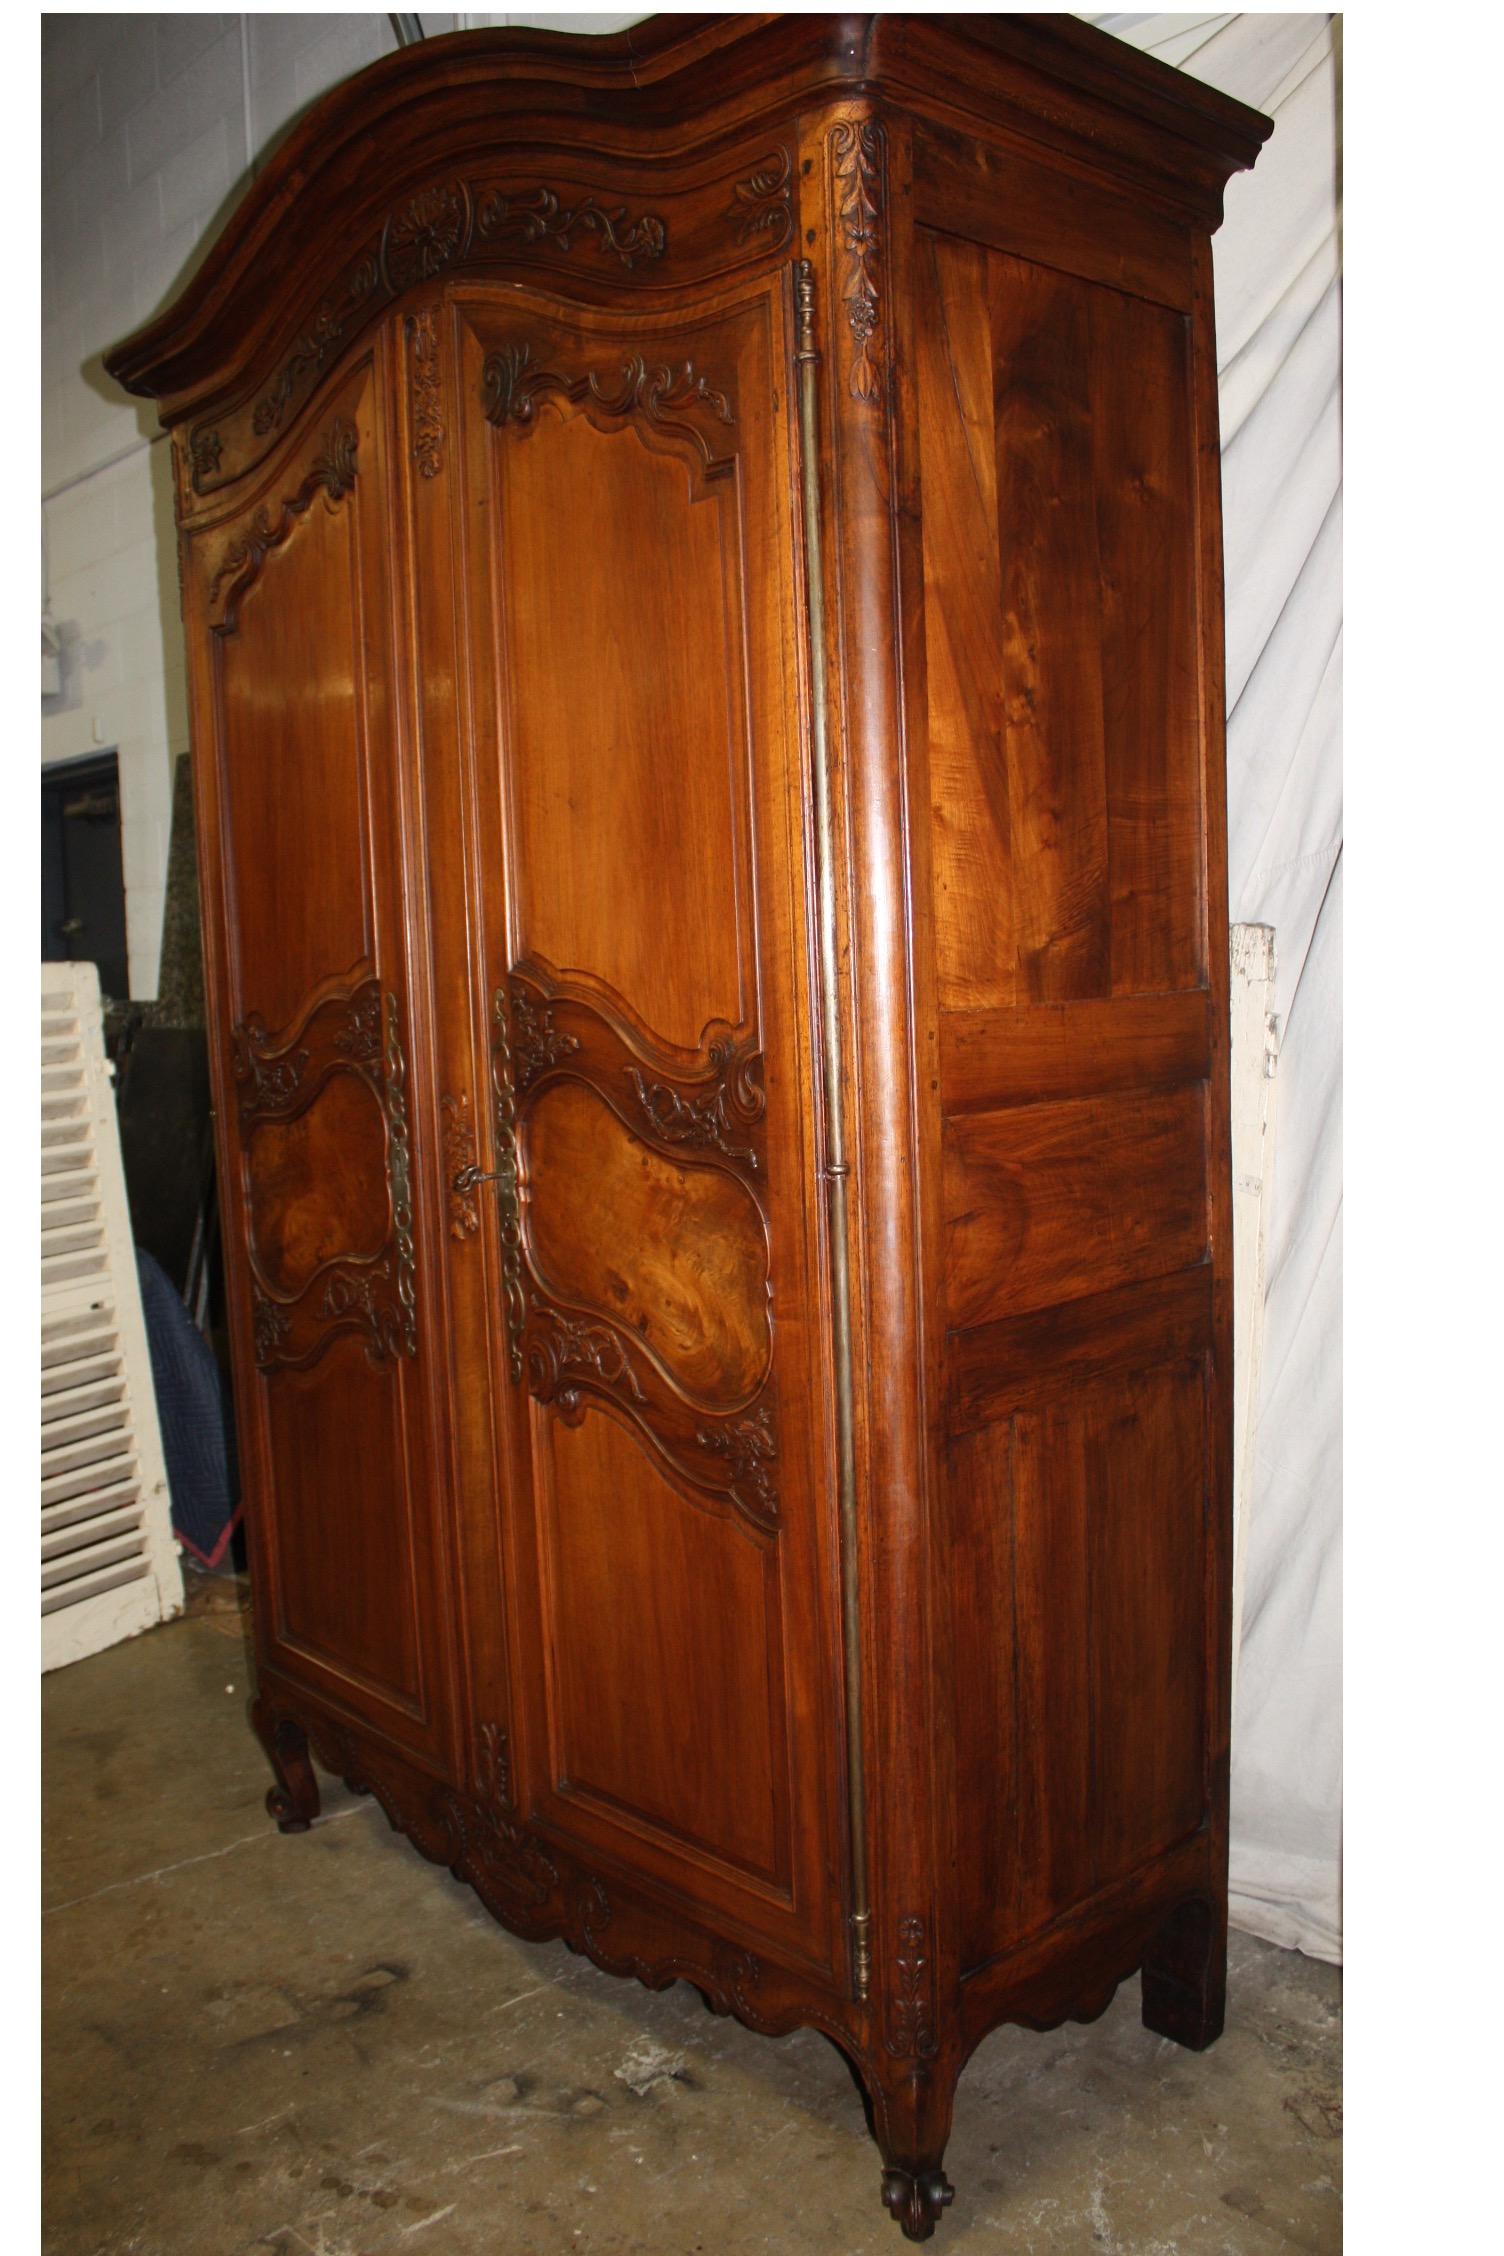 Hand-Carved Magnificent 18th Century French Wardrobe